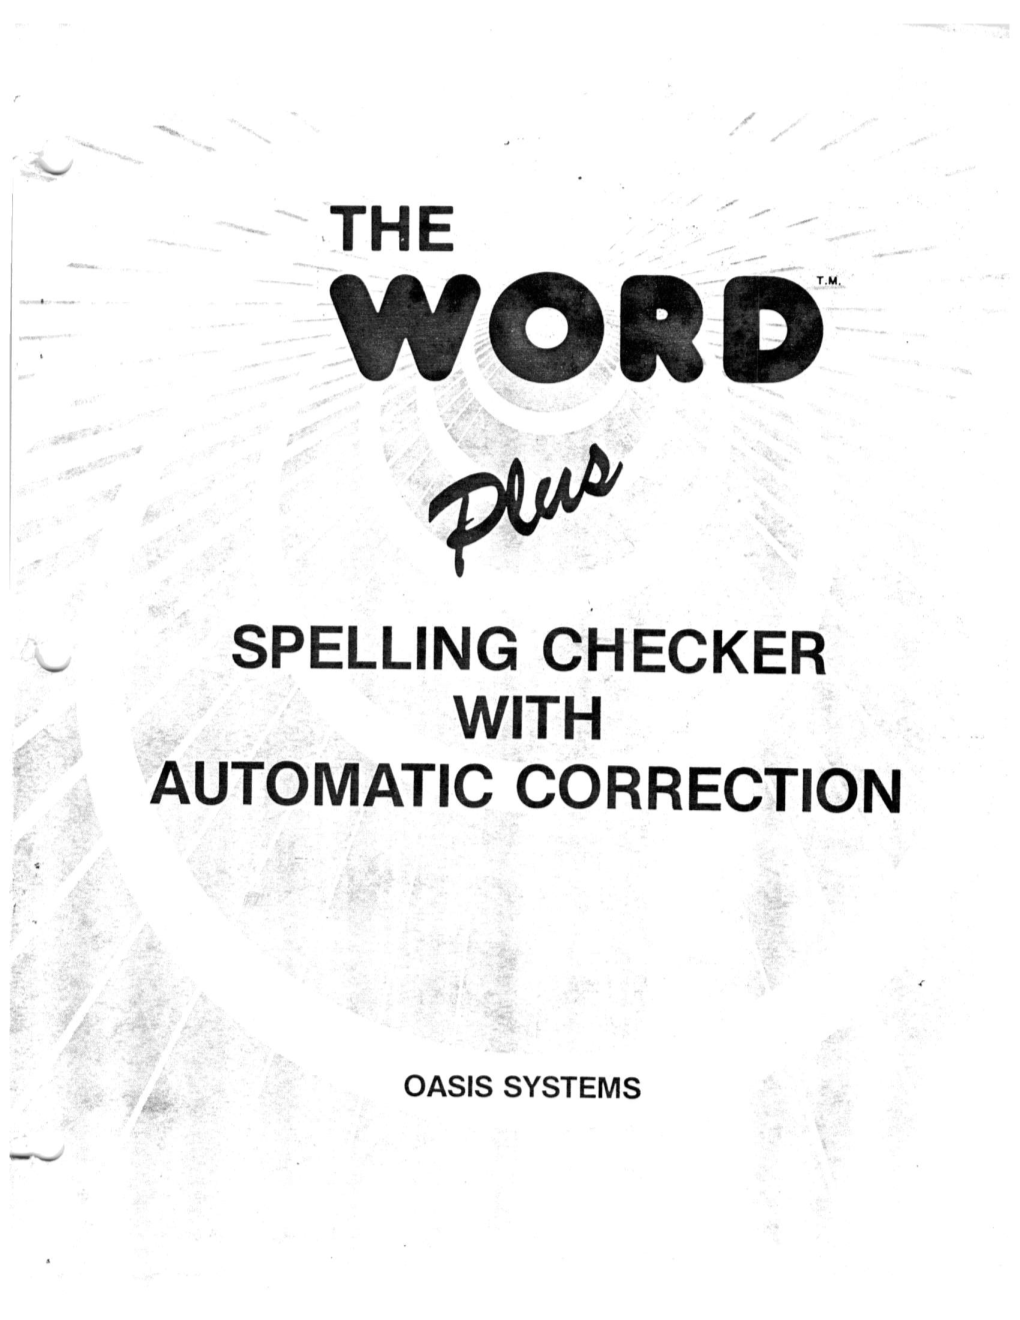 The Tm Spelling Checker with Automatic Correction